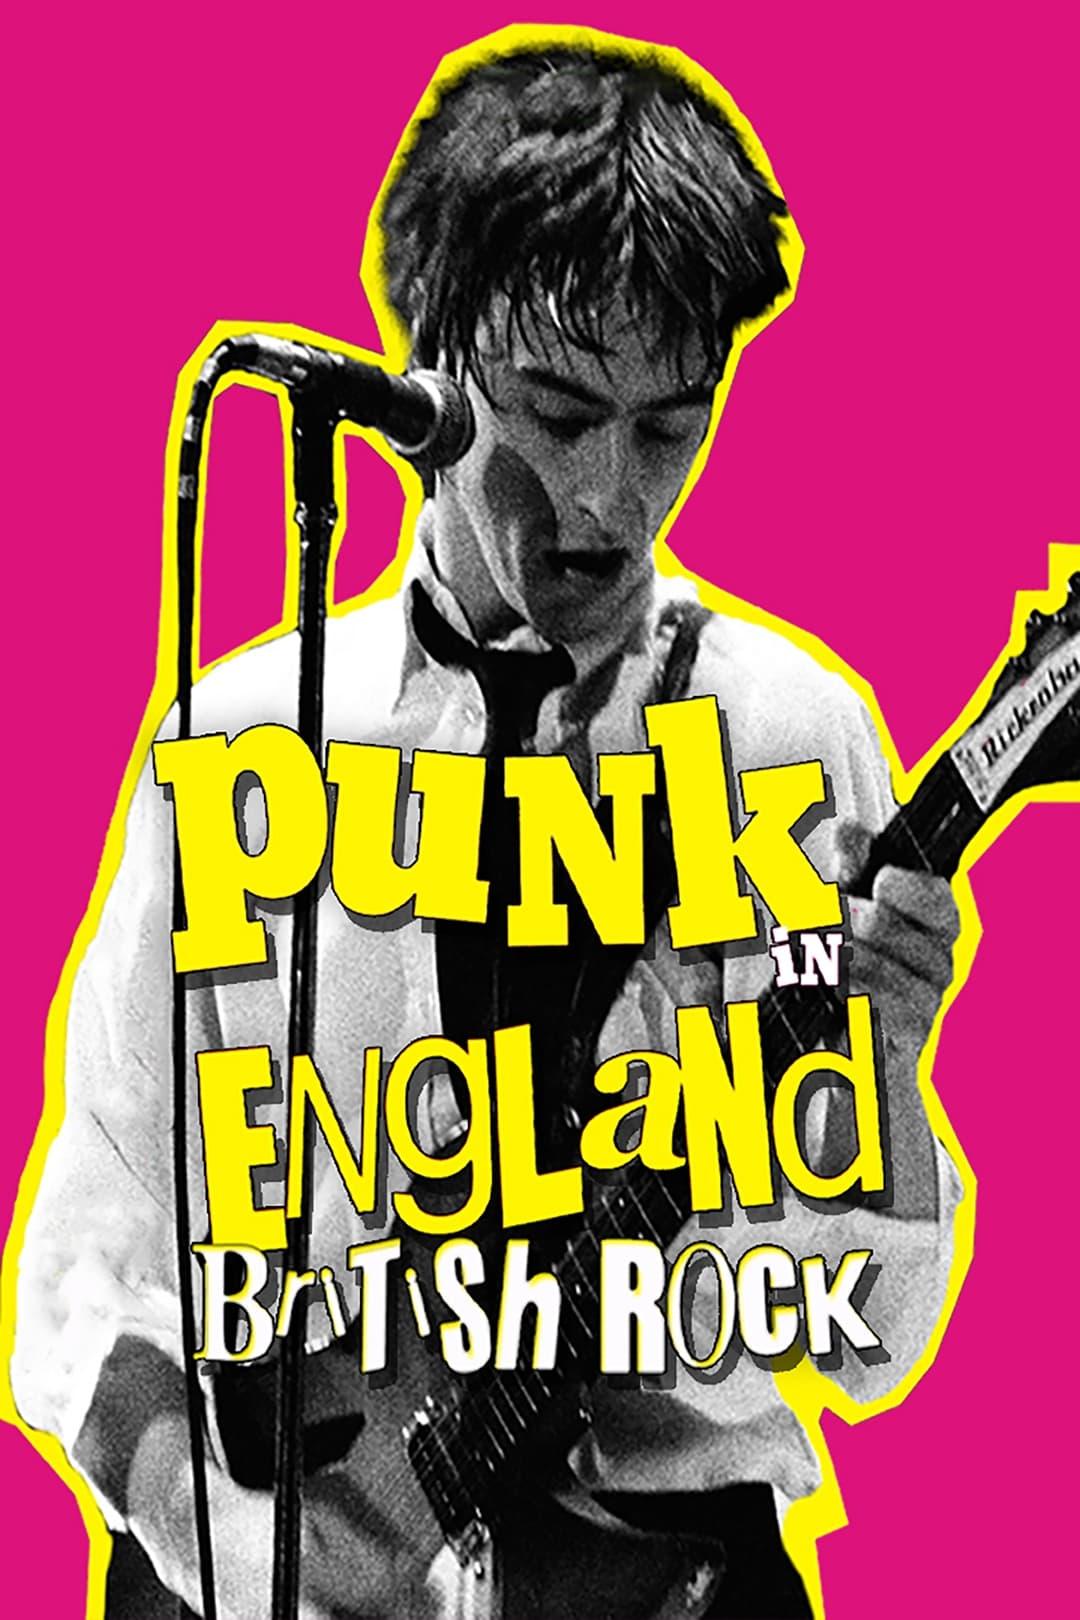 Punk and Its Aftershocks poster